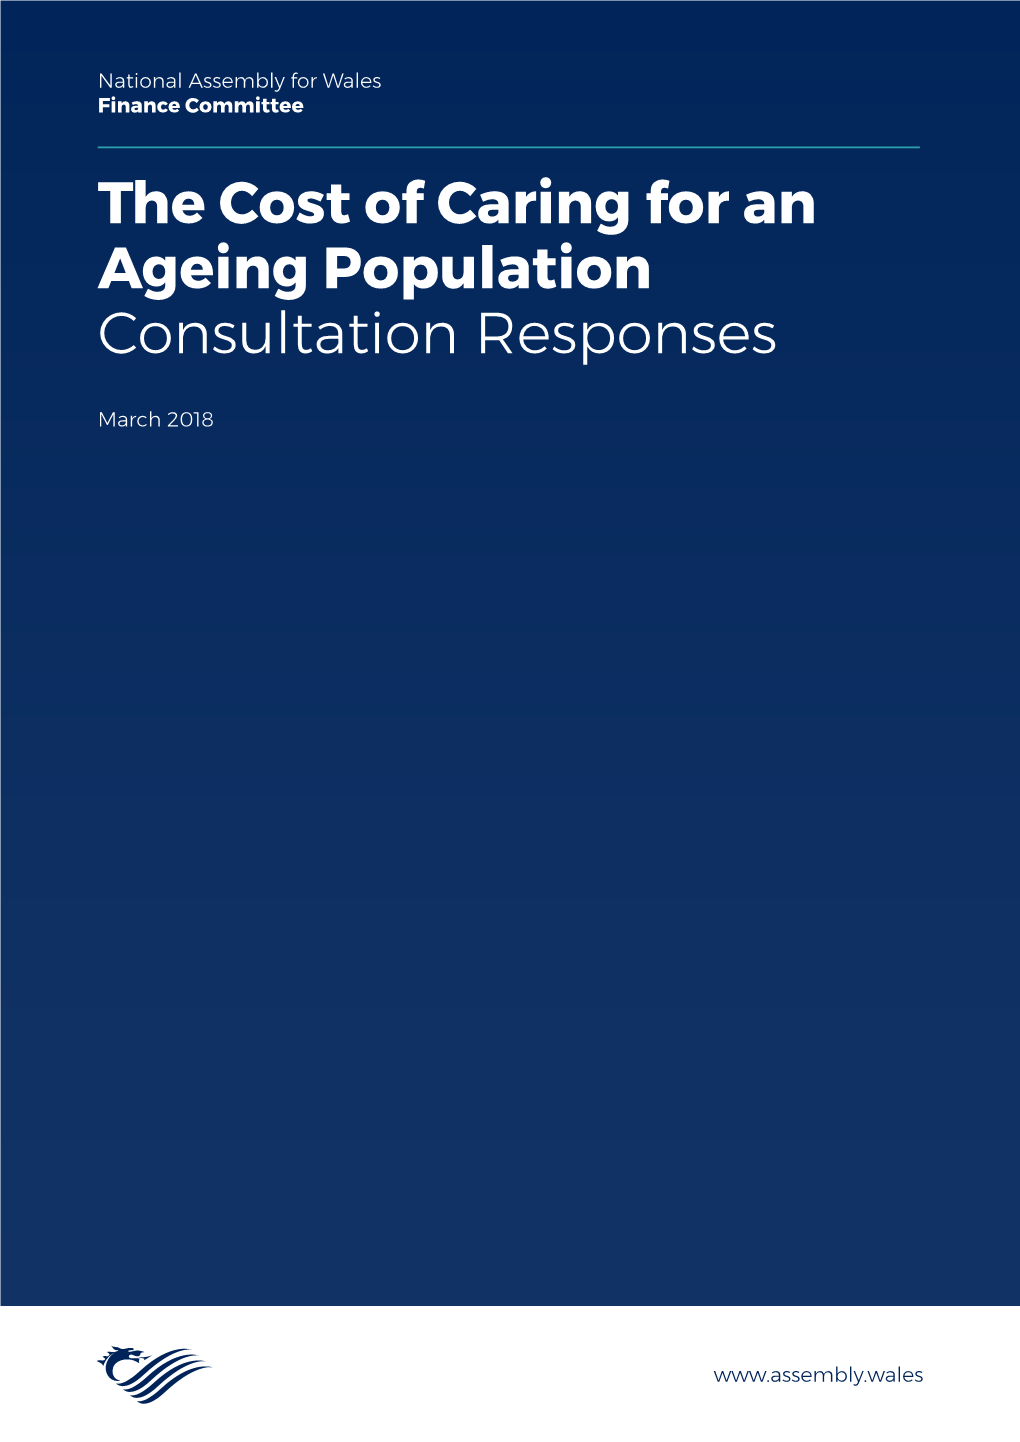 The Cost of Caring for an Ageing Population Consultation Responses